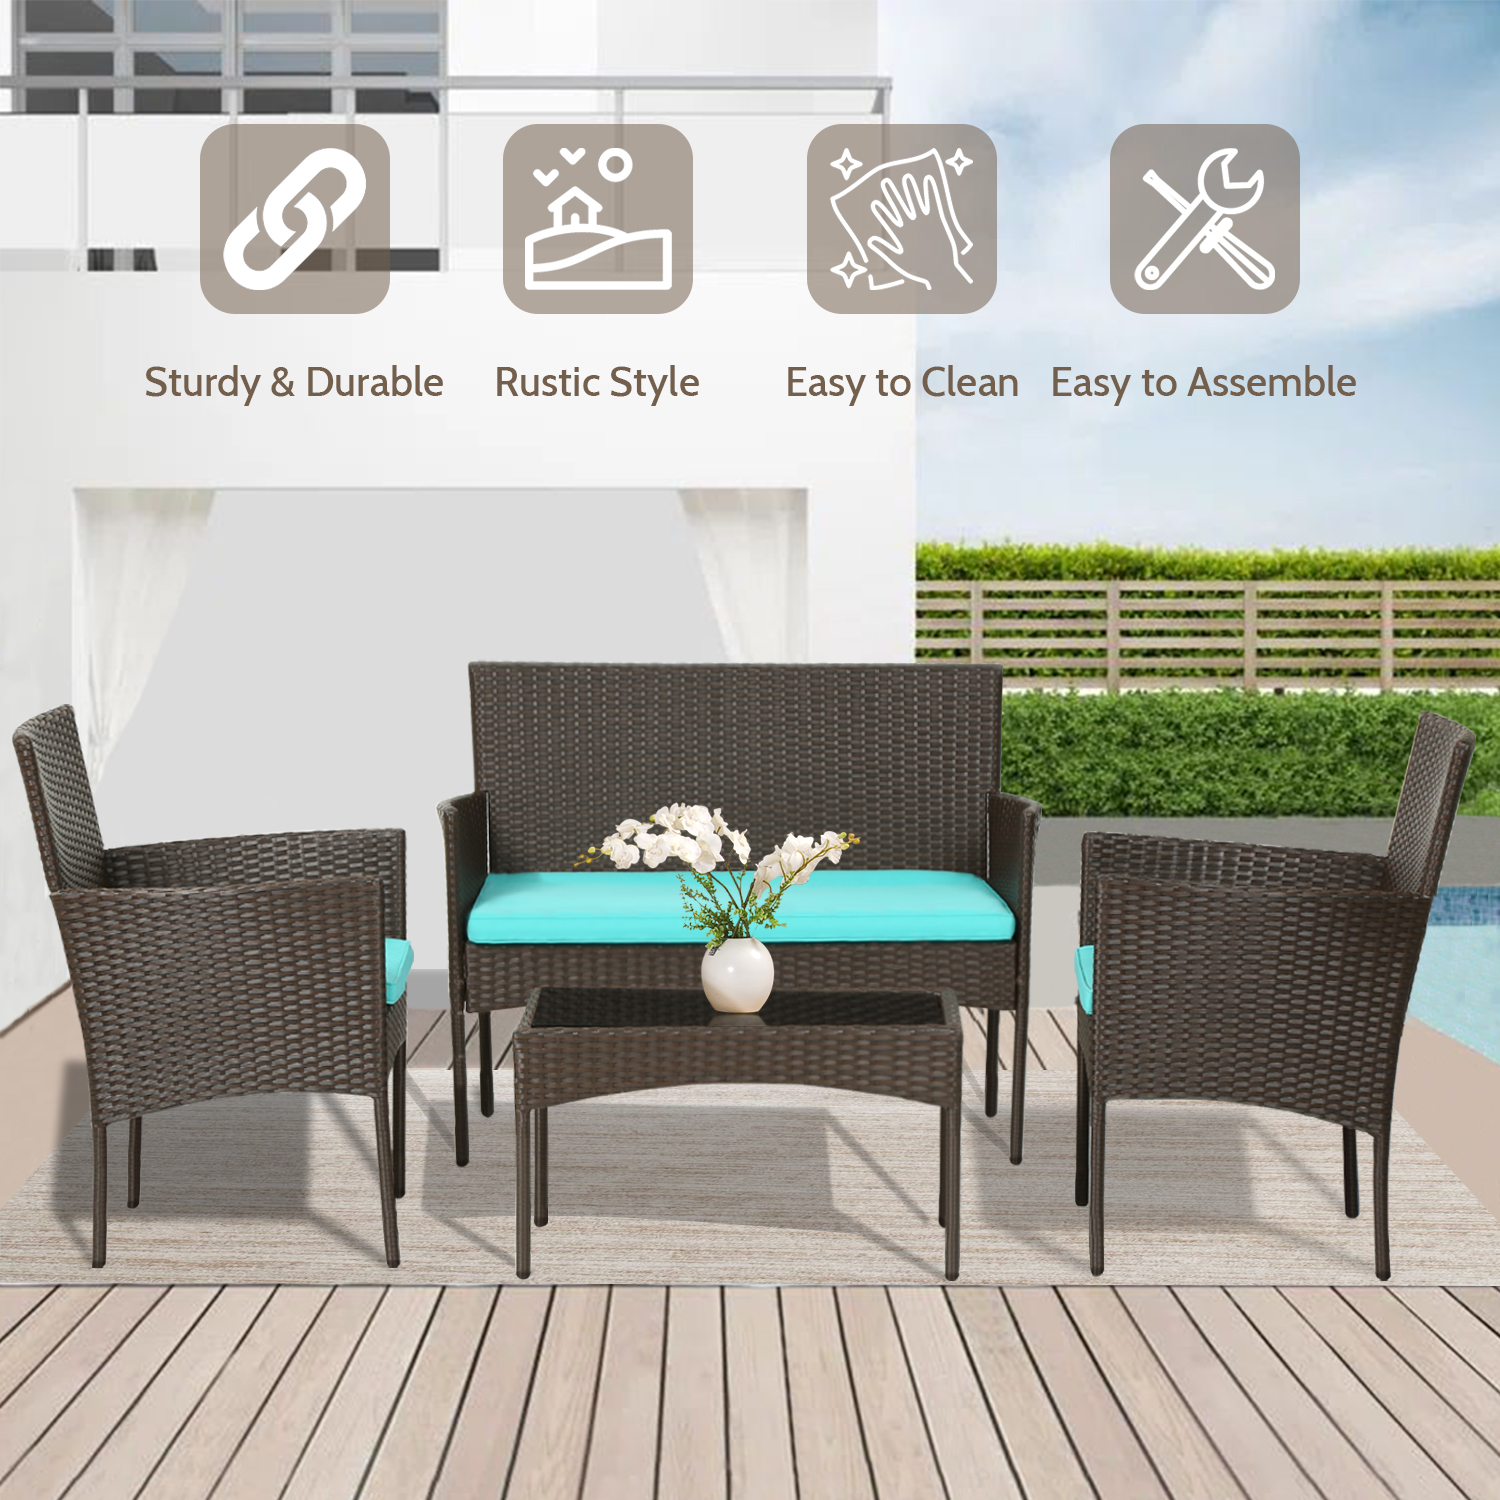 4 Pieces Patio Furniture Set Wicker Patio Conversation Set with Rattan Chair Loveseats Coffee Table for Outdoor Indoor Garden Backyard Porch Poolside Balcony,Brown Wicker/Blue Cushions - image 4 of 7